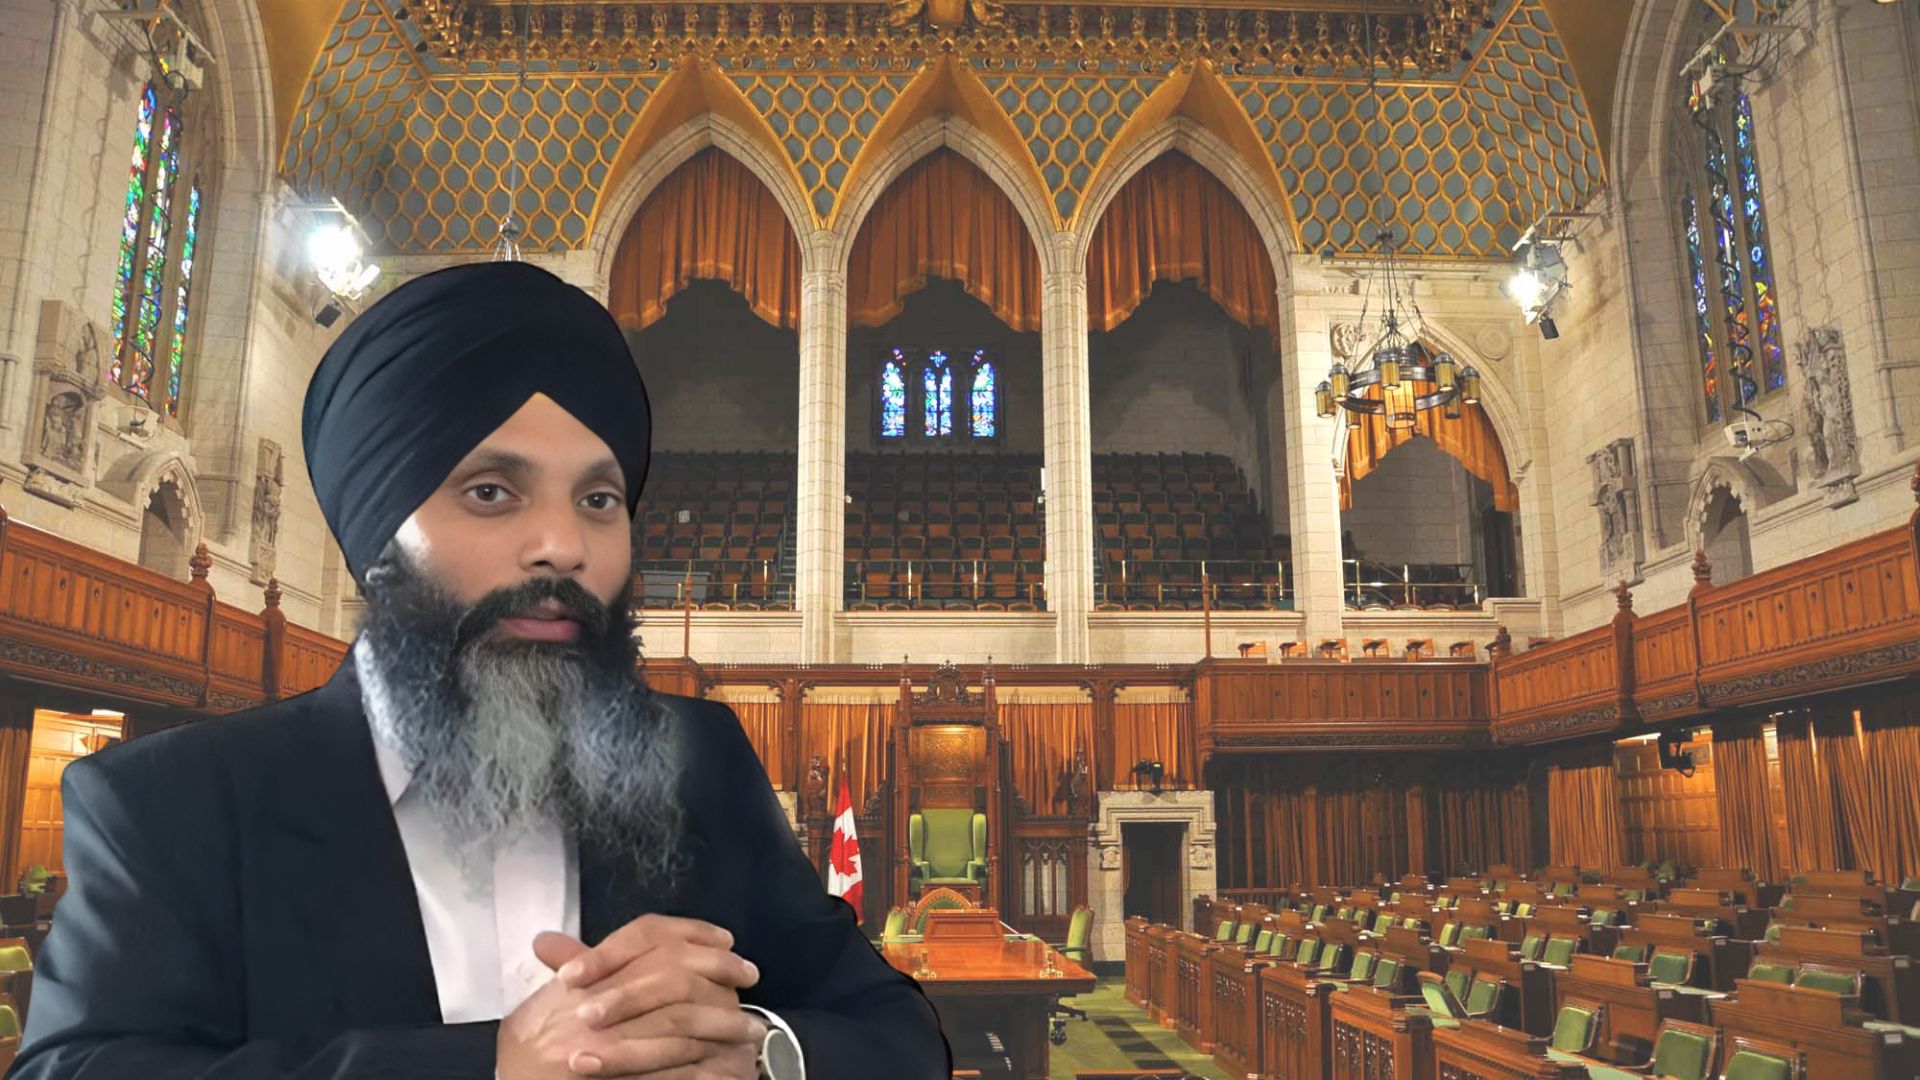 Canadian Parliament Honors The First Death Anniversary of Sikh Separatist Hardeep Singh Nijjar by Observing Moment of Silence